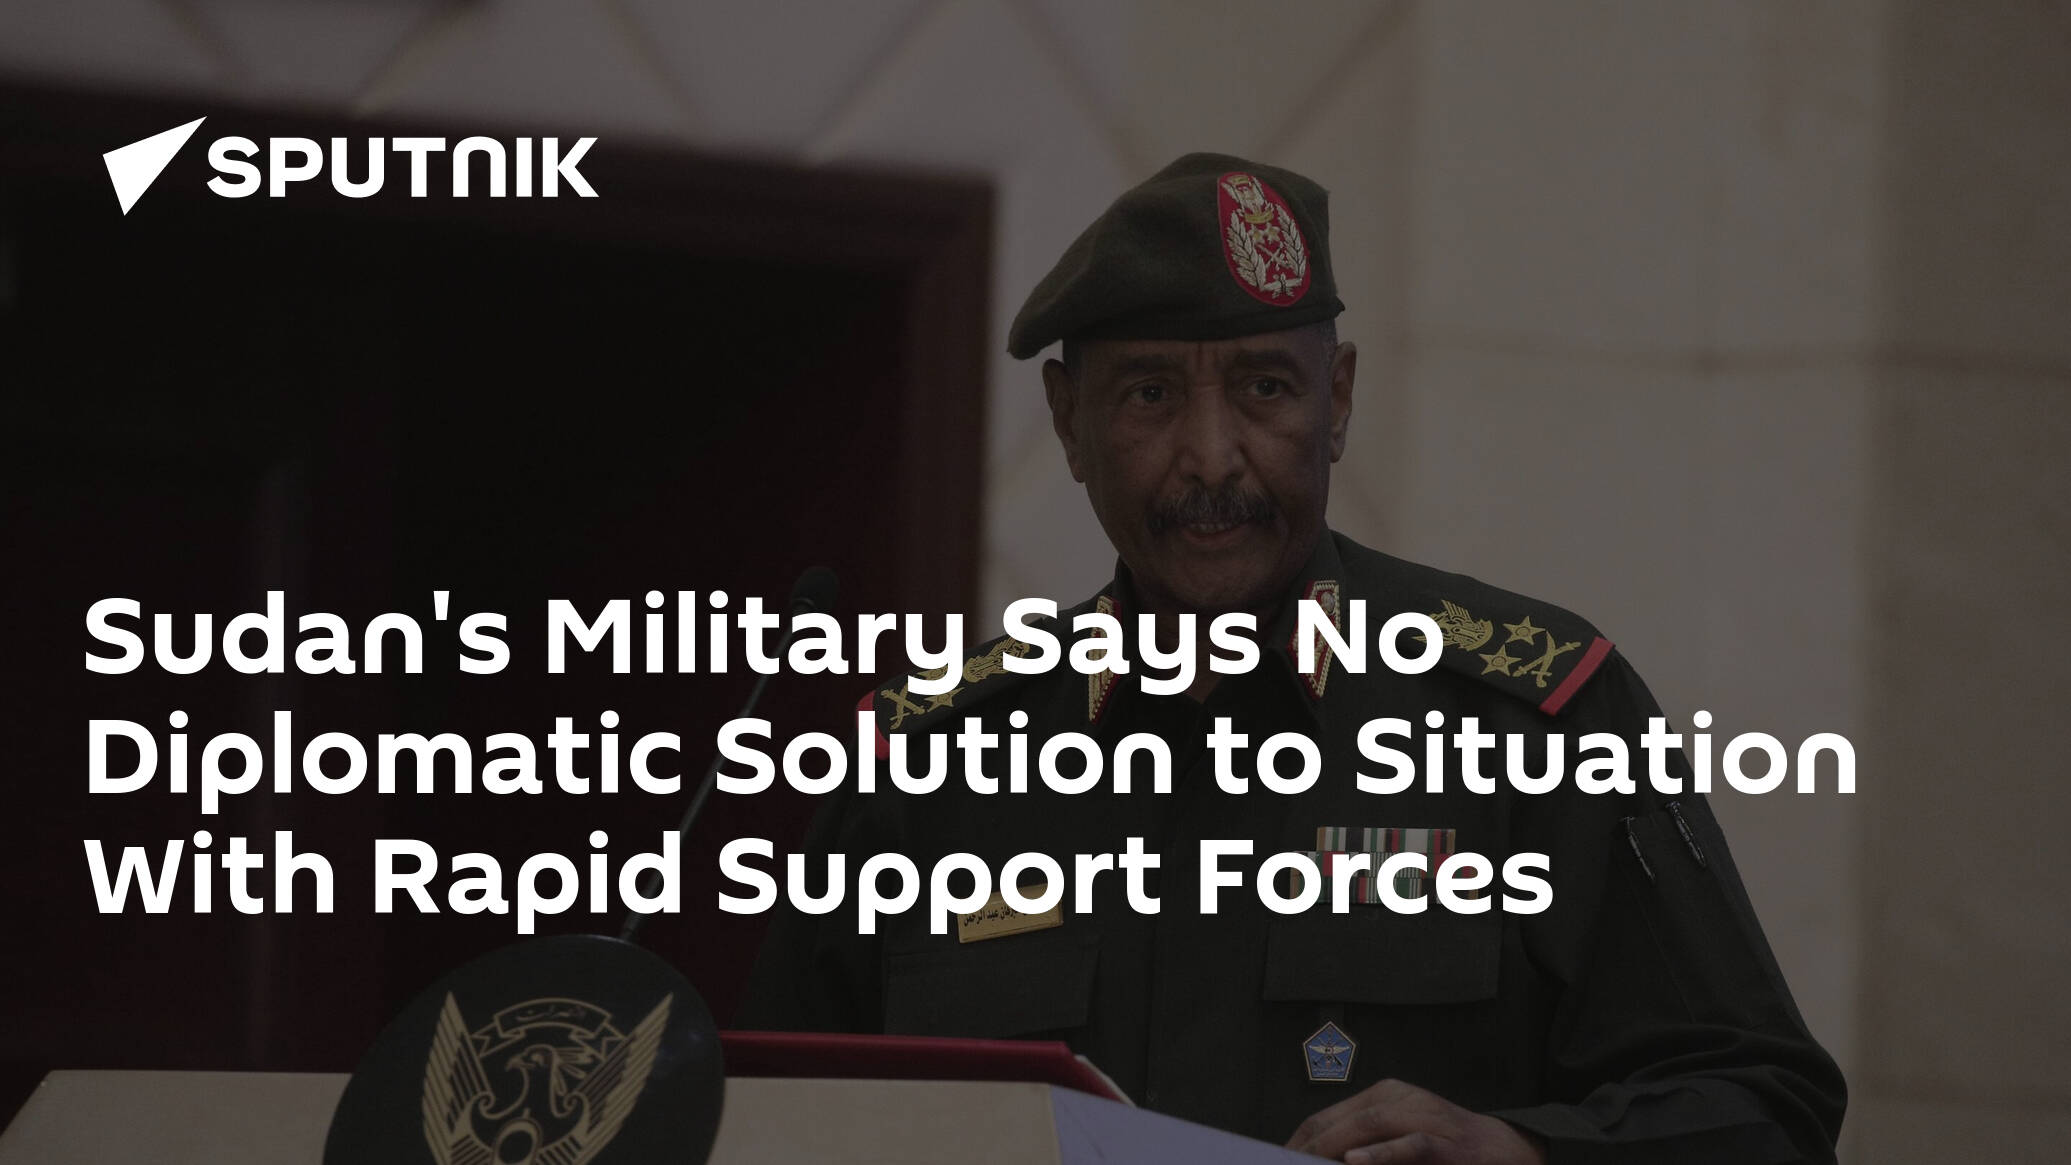 Sudan's Military Says No Diplomatic Solution to Situation With Rapid Support Forces